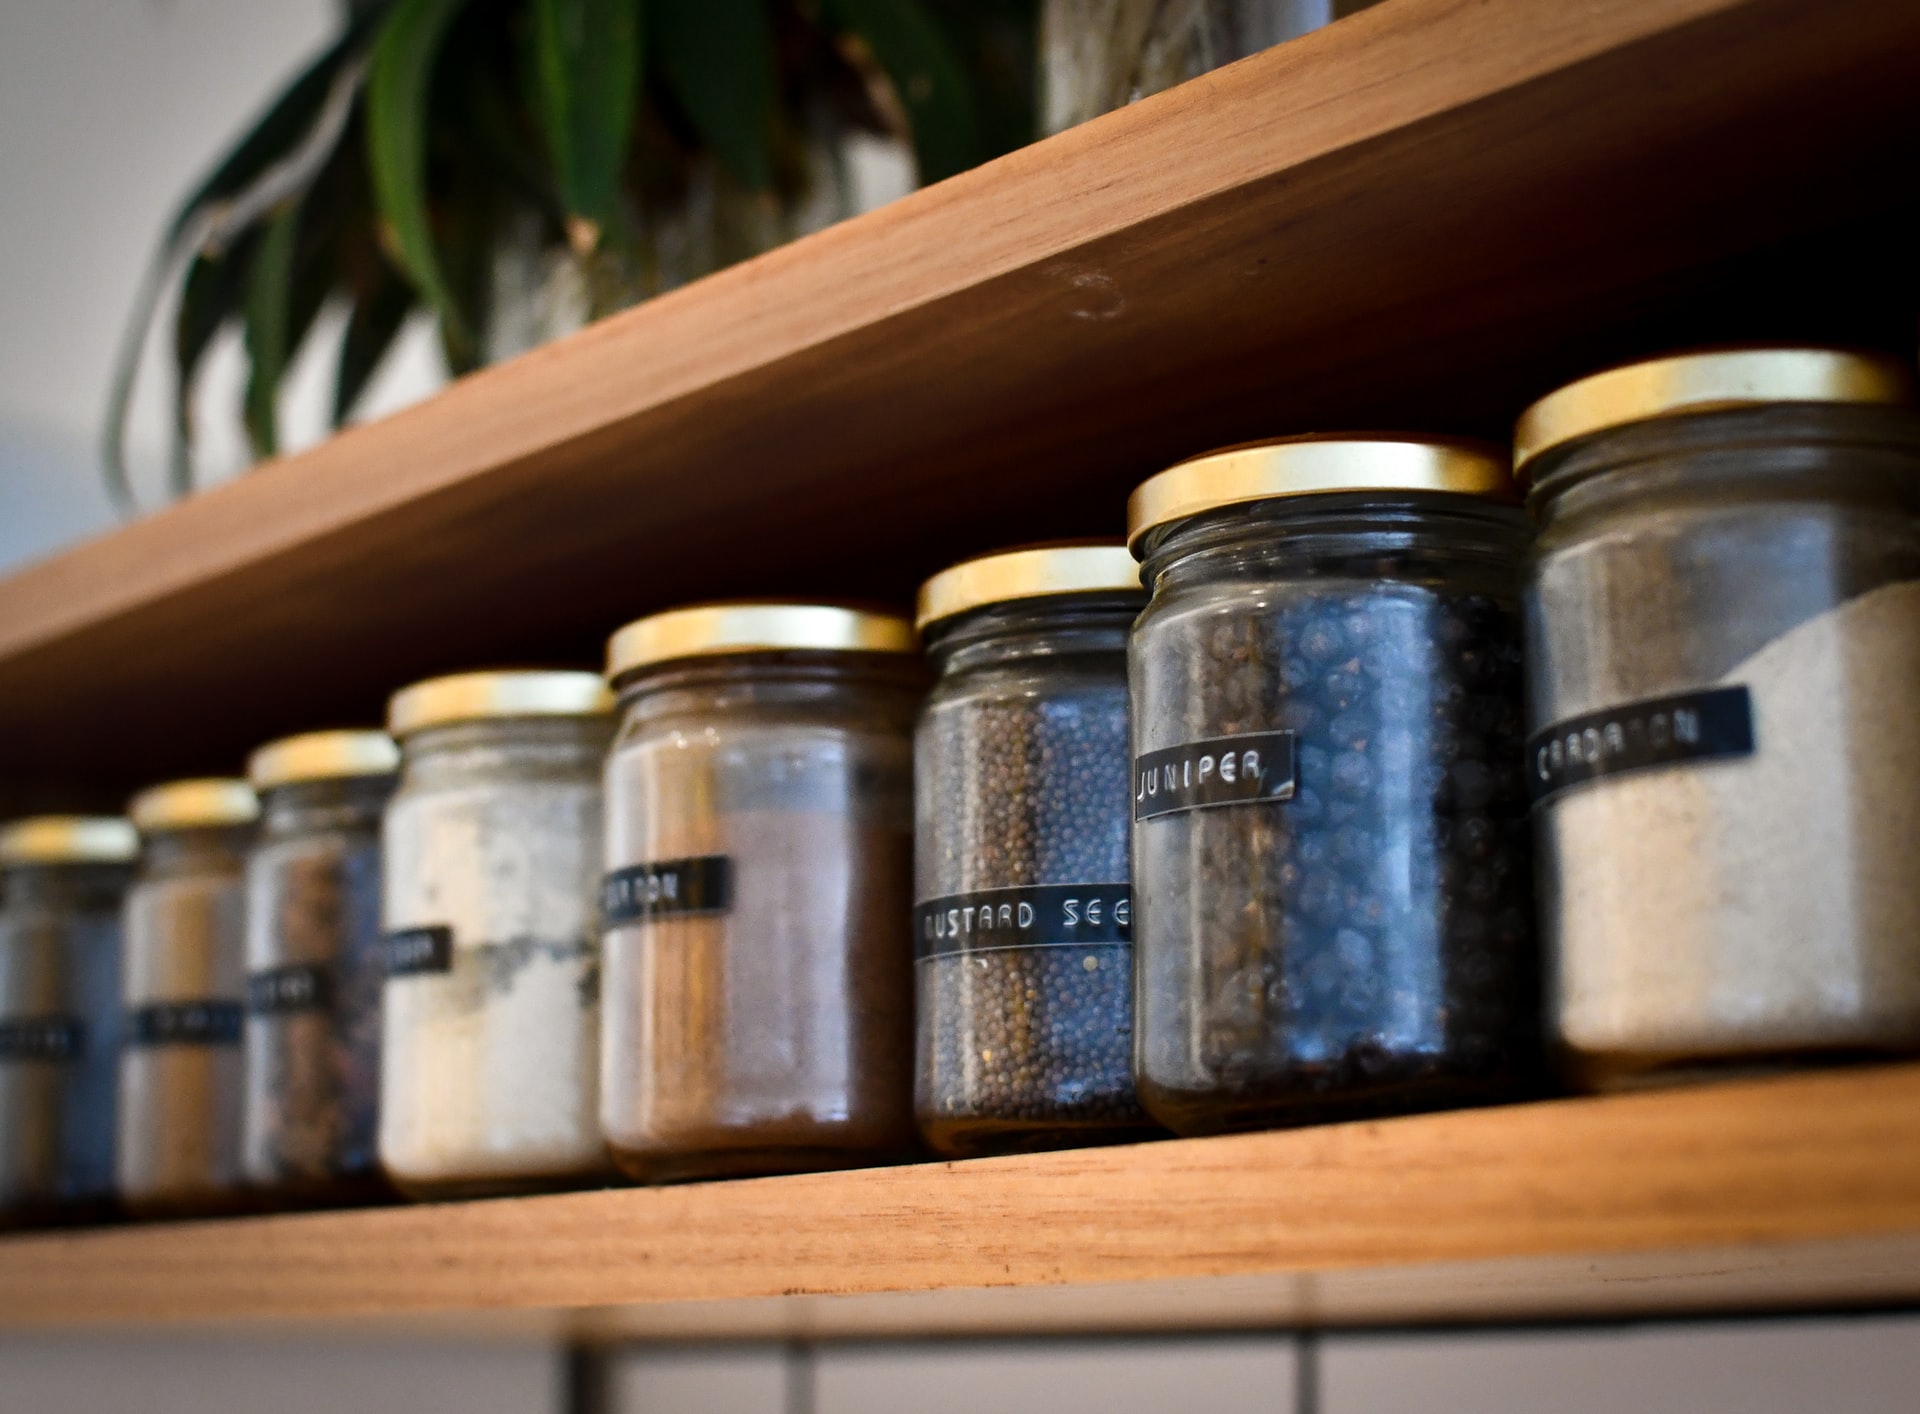 Pantry shelf with labeled jars